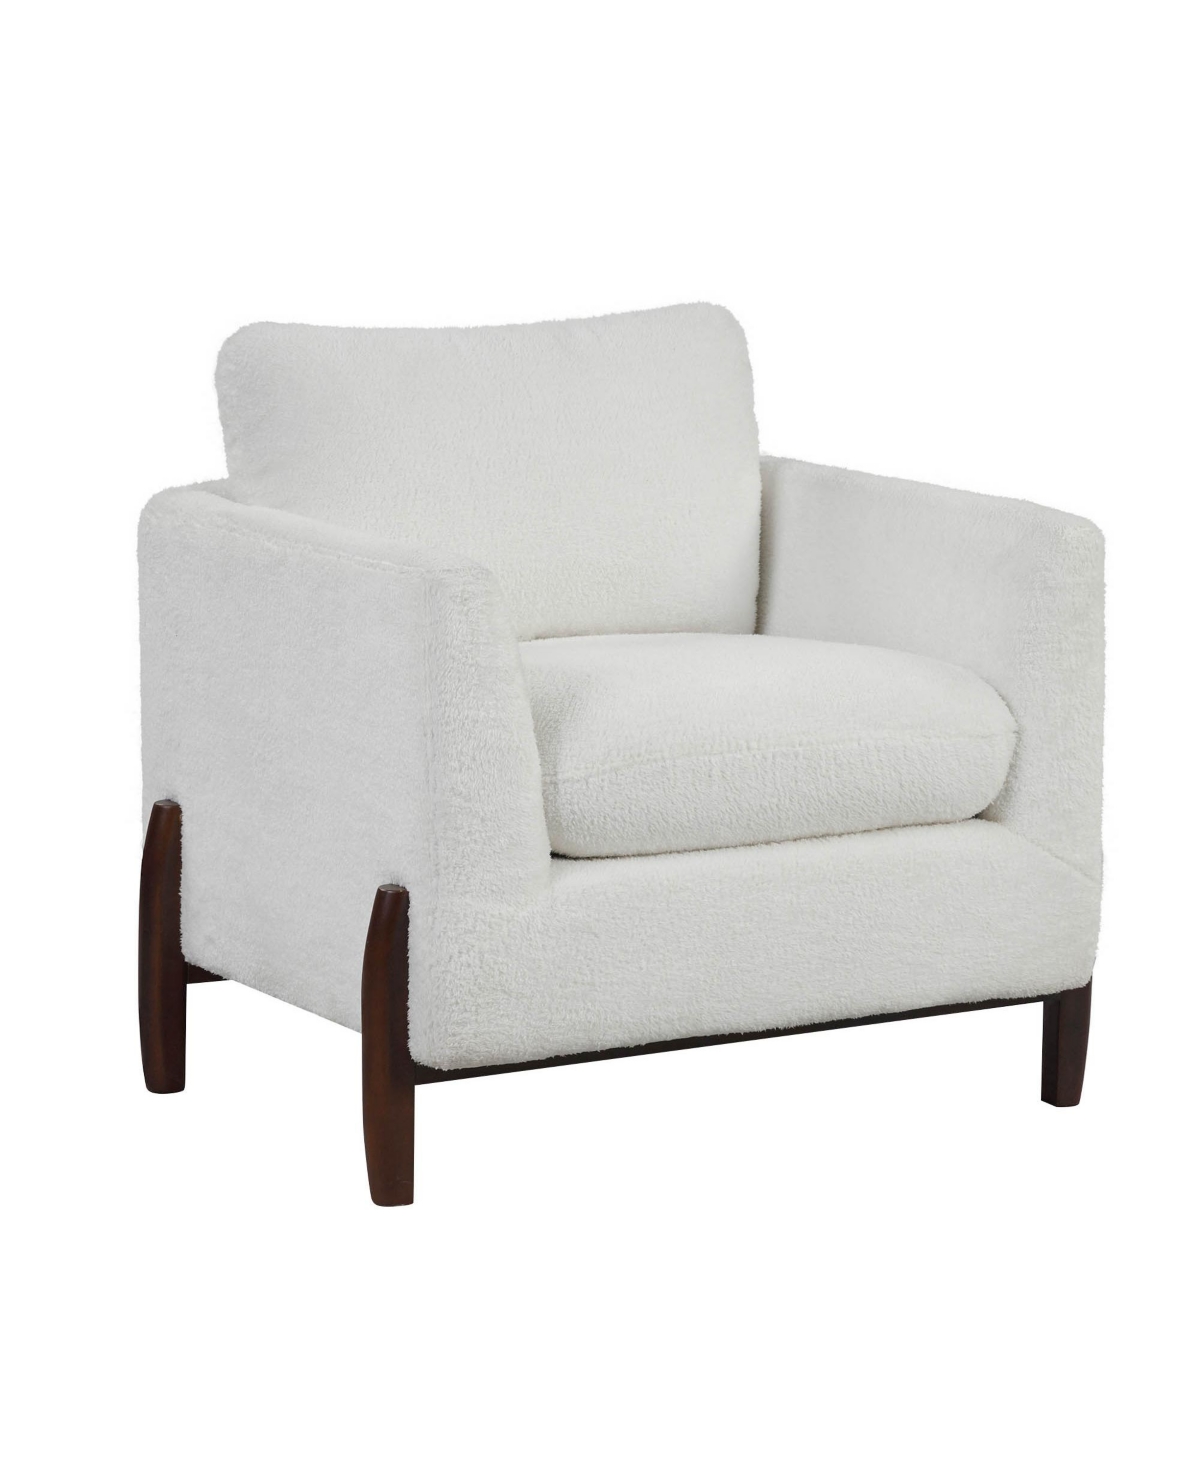 Lifestyle Solutions 32" Wood, Steel, Foam And Polyester Piza Accent Chair In Cream